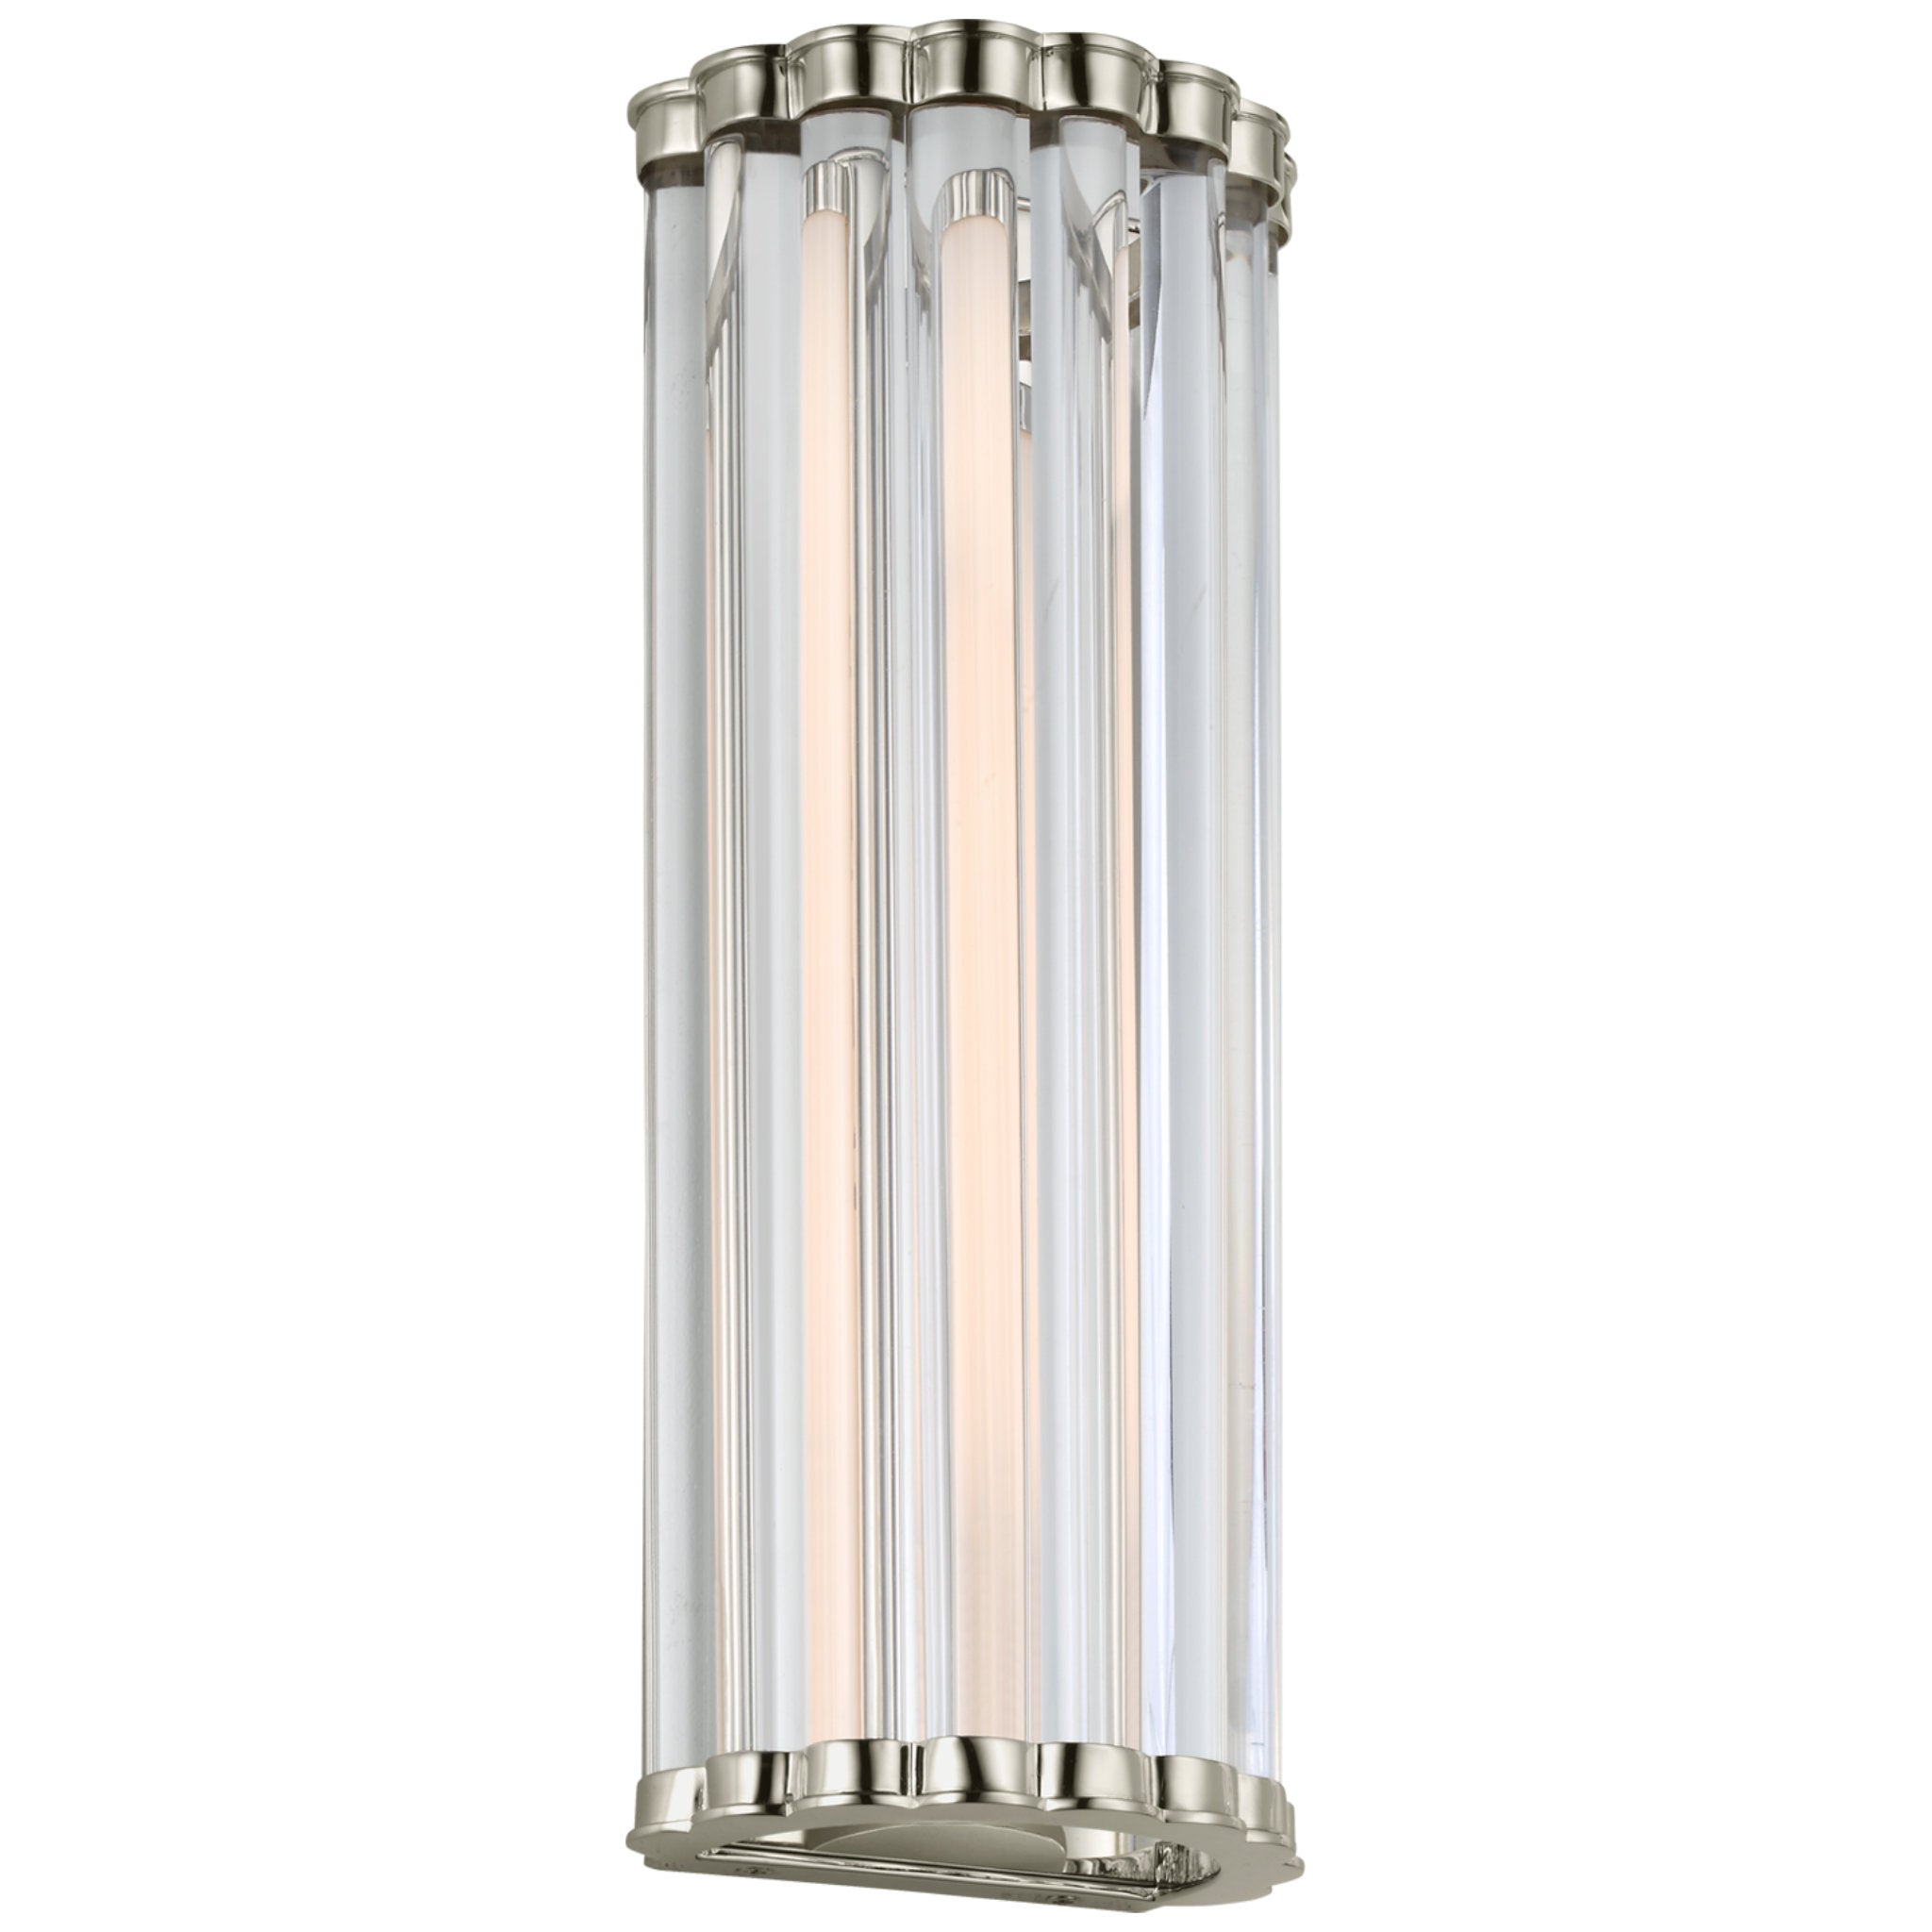 Chapman & Myers Kean 14" Sconce in Polished Nickel with Clear Glass Rods